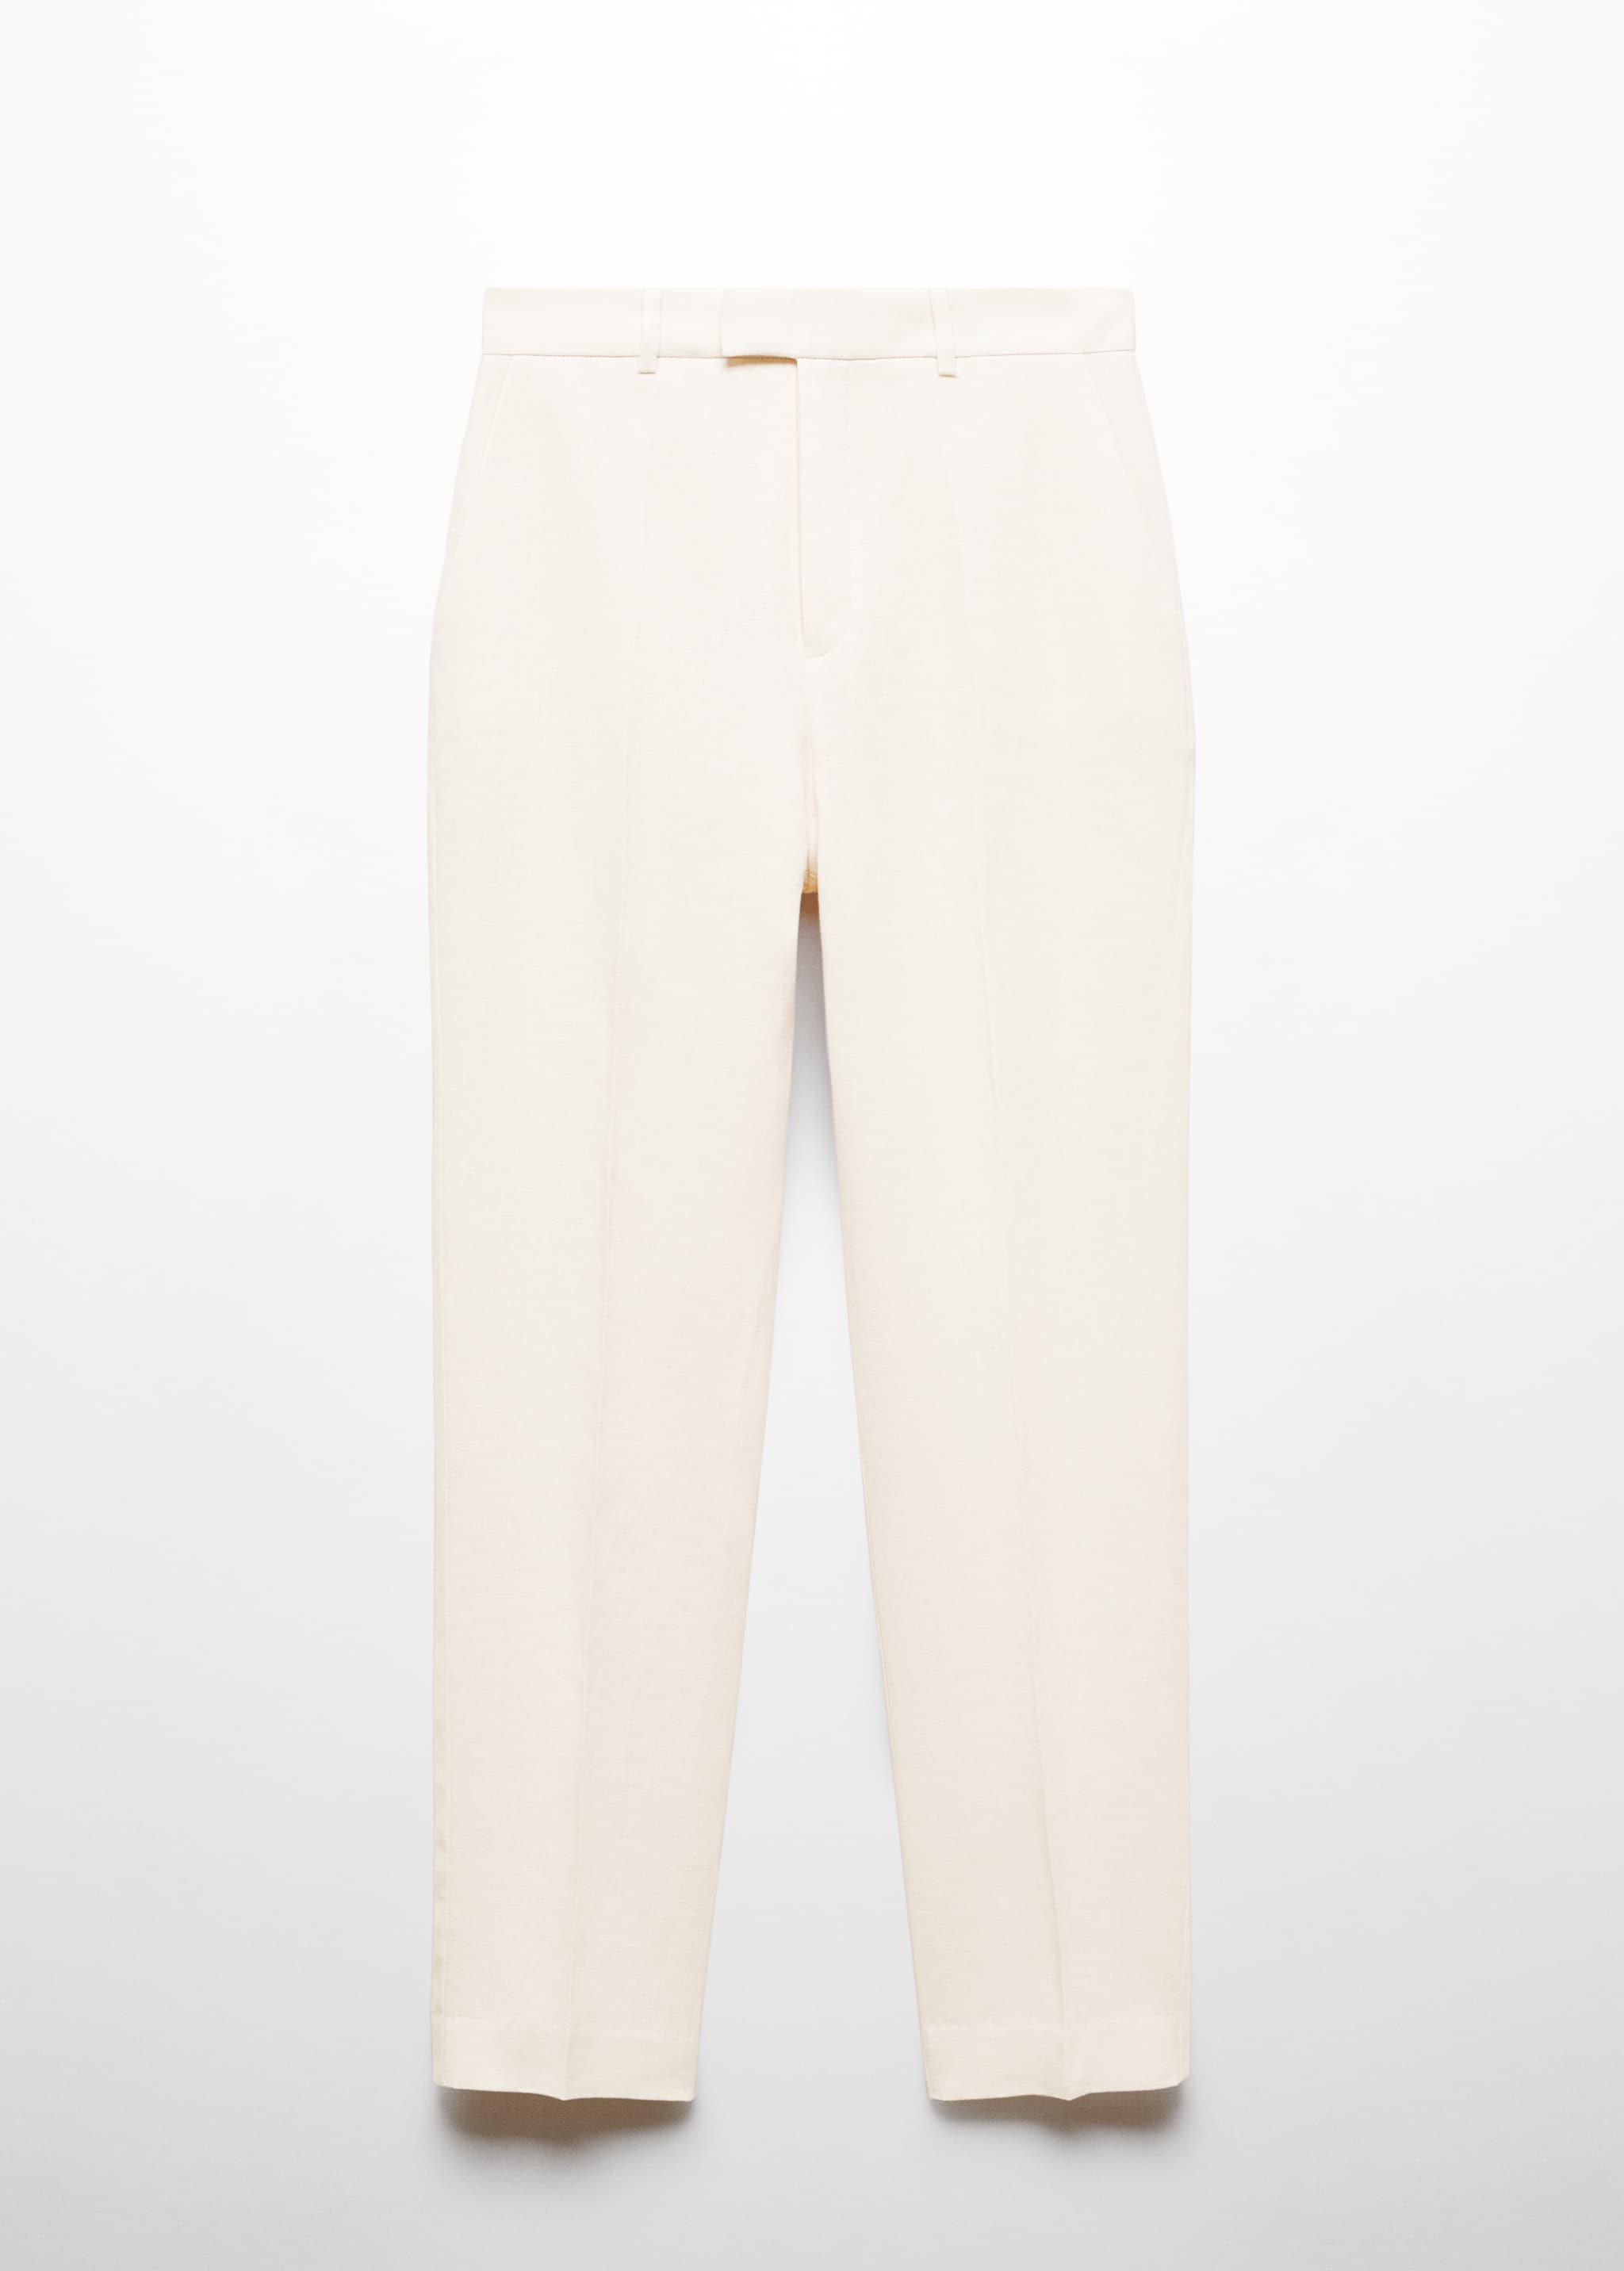 100% linen suit trousers - Article without model